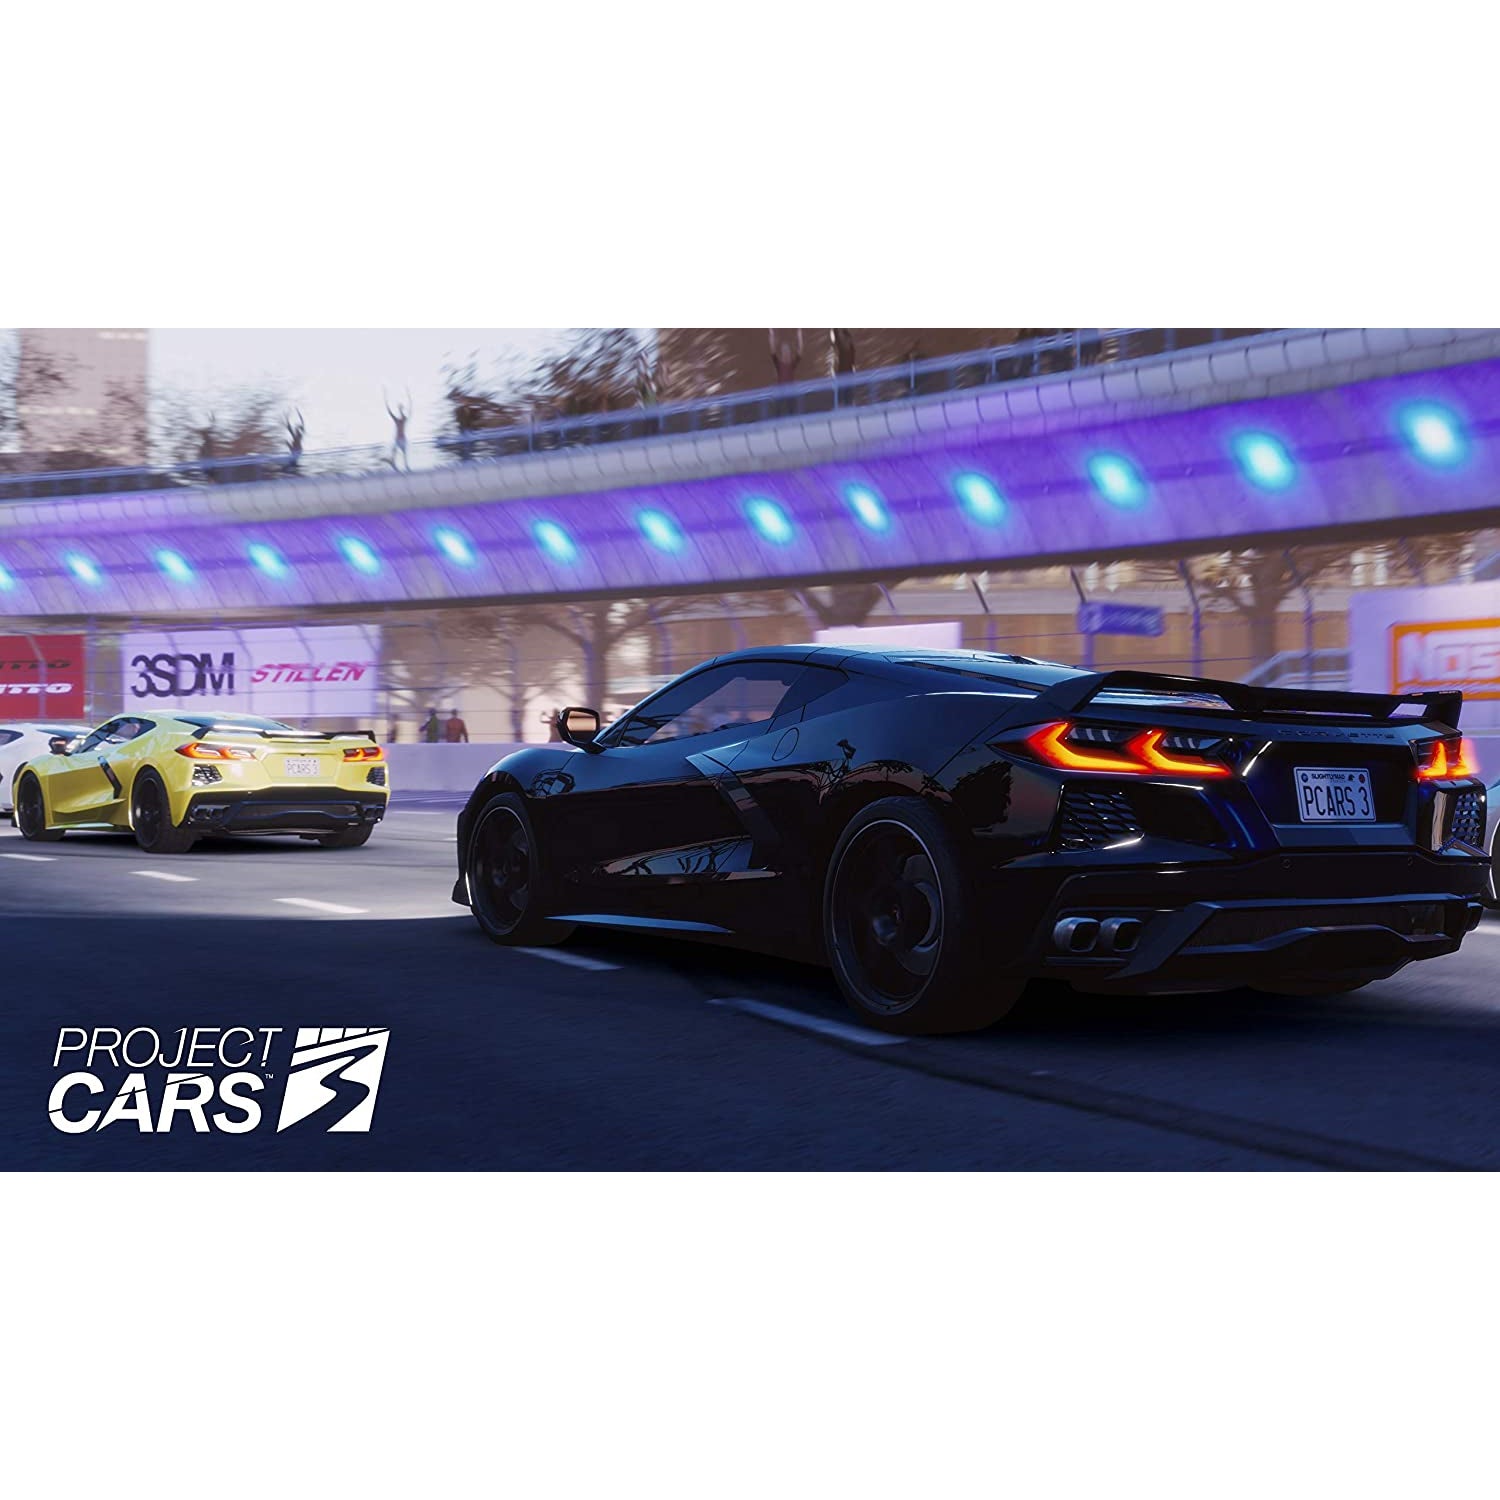 Project Cars 3 (Xbox One), Video Game for Xbox One